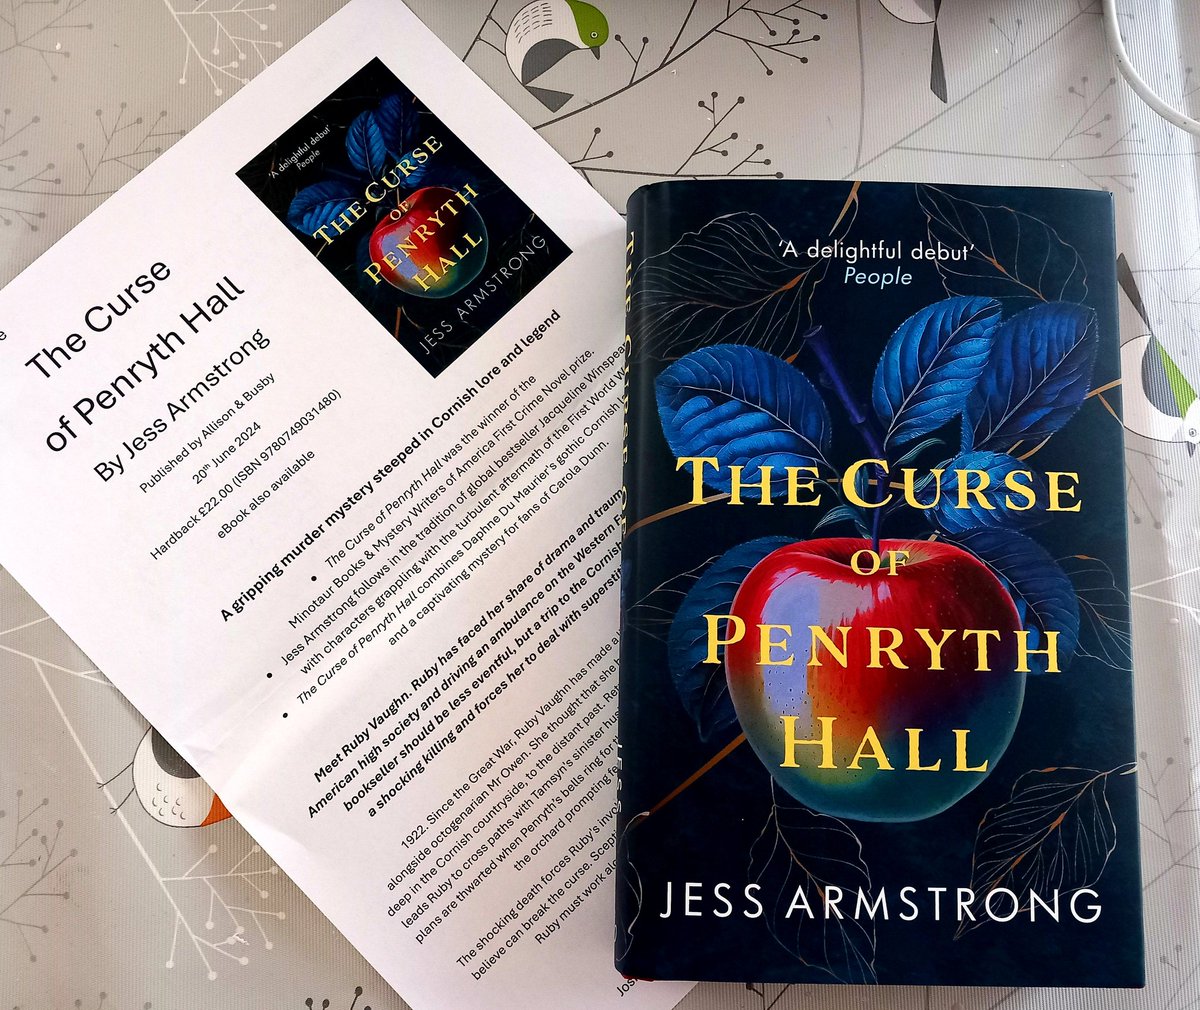 Huge thanks to @AllisonandBusby for my copy of #TheCurseOfPenrythHall by #JessArmstrong out on 20th June thank you to #Josie! #BookBlogger #BookTwitter #BookReviewer #BookDebut #DebutAuthor